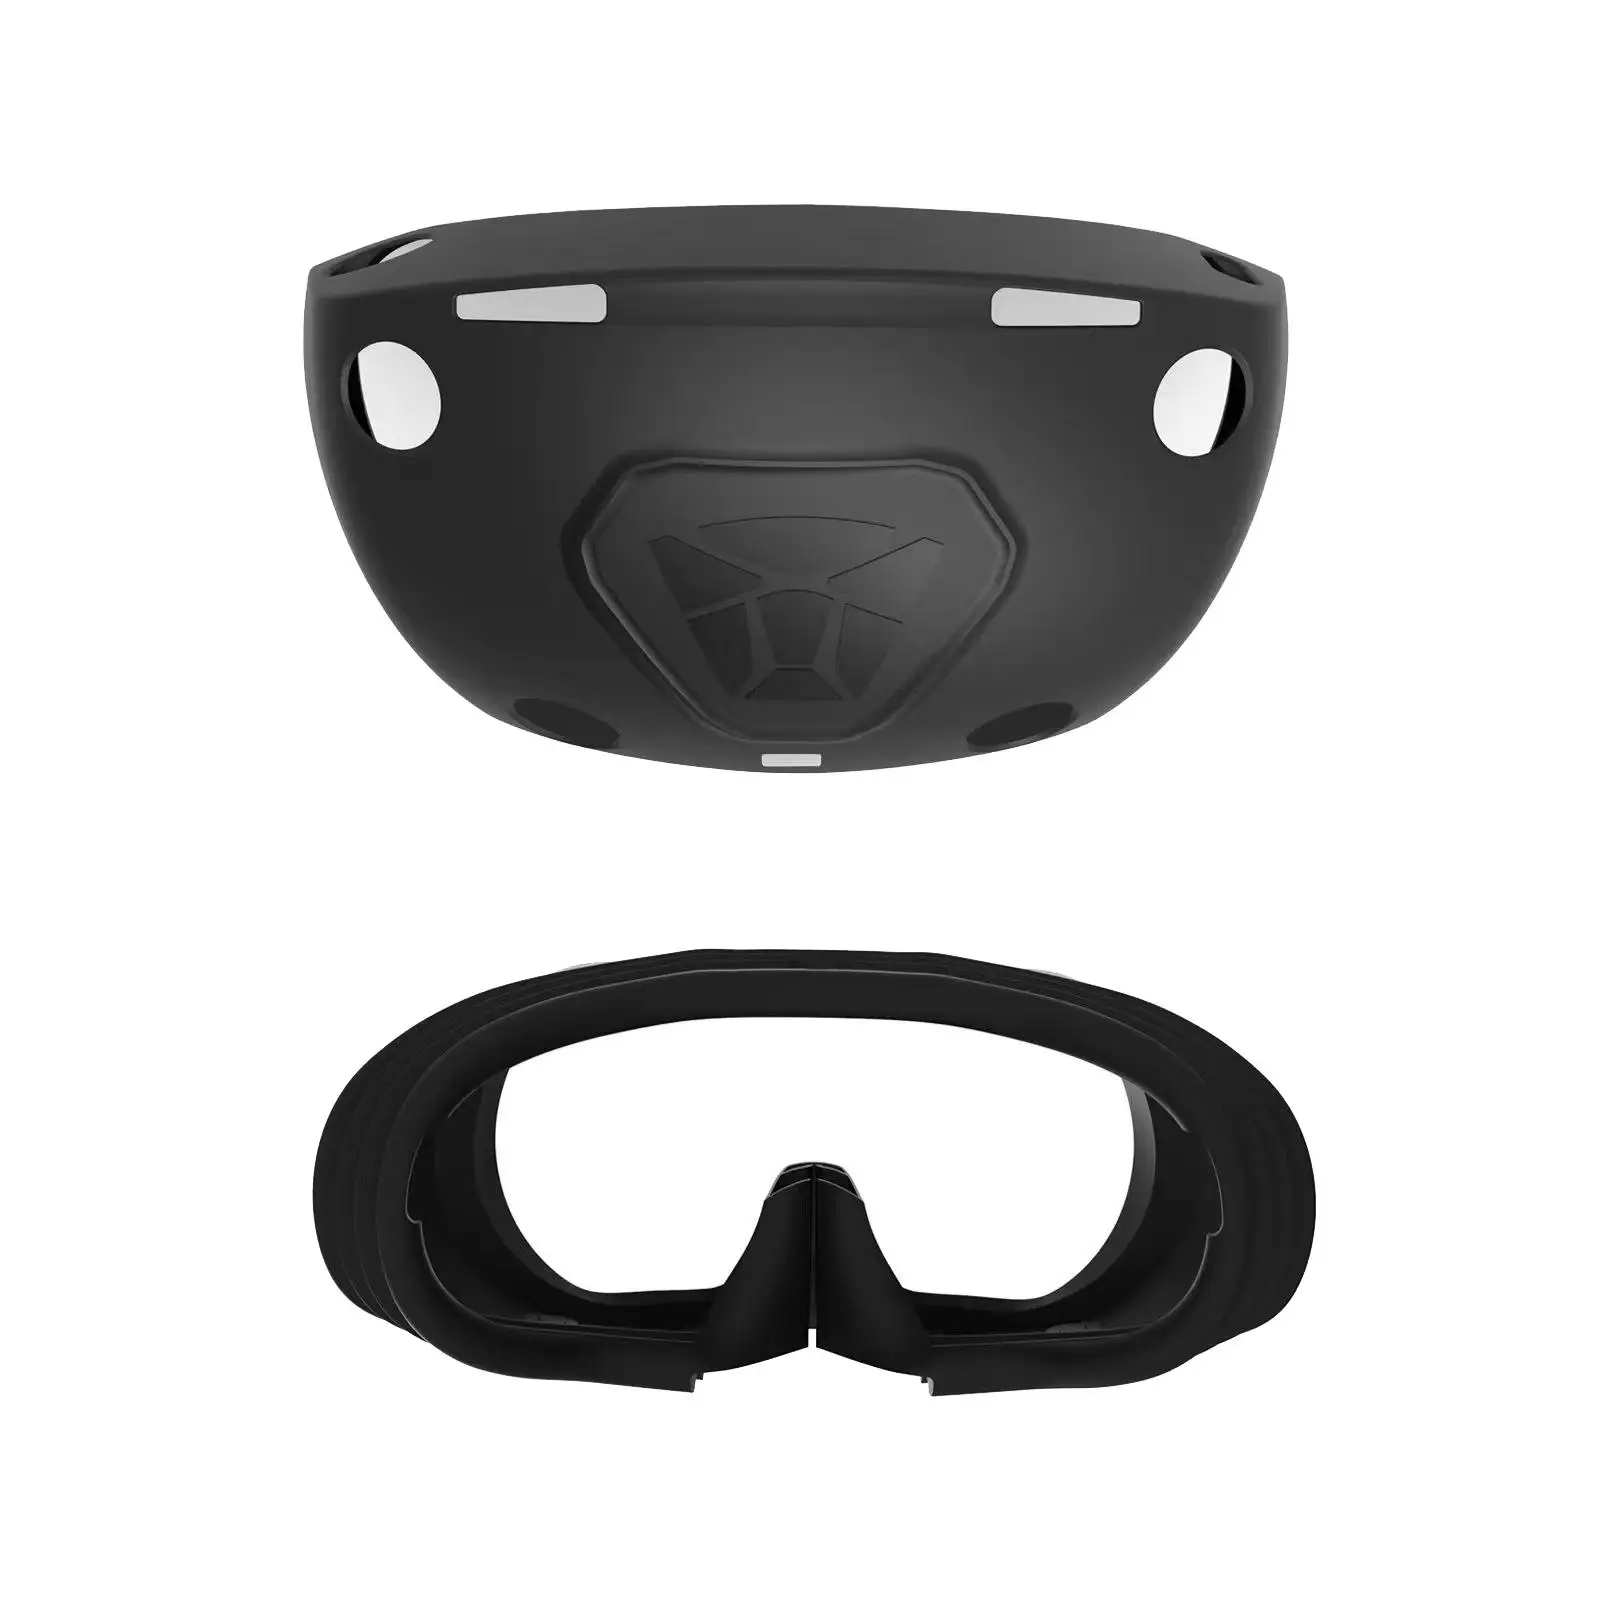 Silicone Protector Cover Sweatproof Dustproof Shockproof Anti Scratch Protective Cover Washable for VR2 Headsets Easy to Install